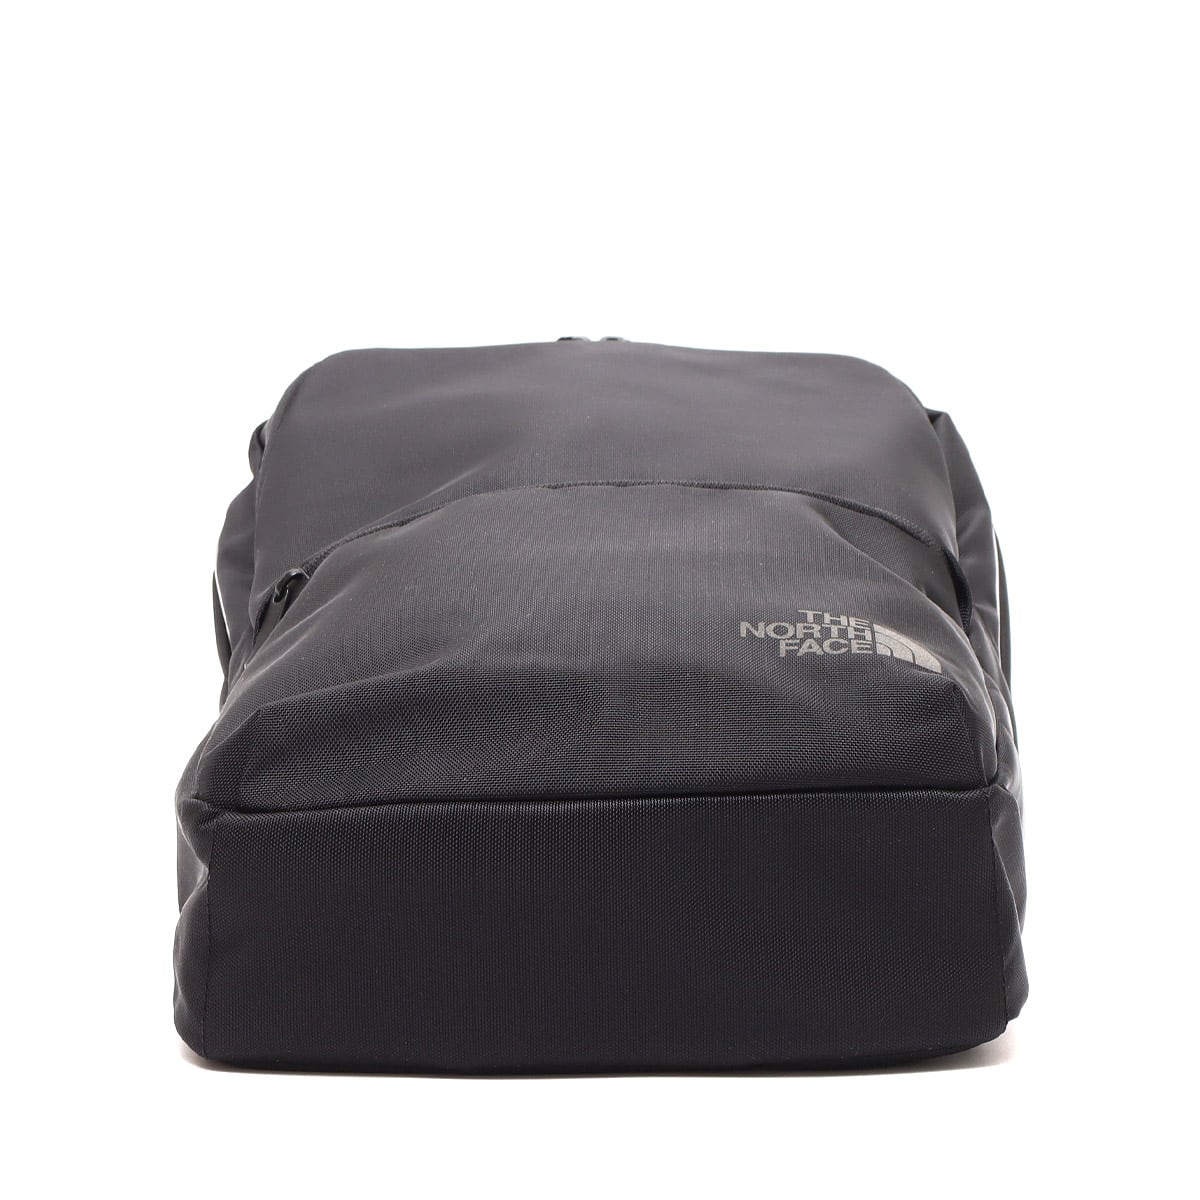 THE NORTH FACE SHUTTLE DAYPACK SLIM BLACK 23SS-I